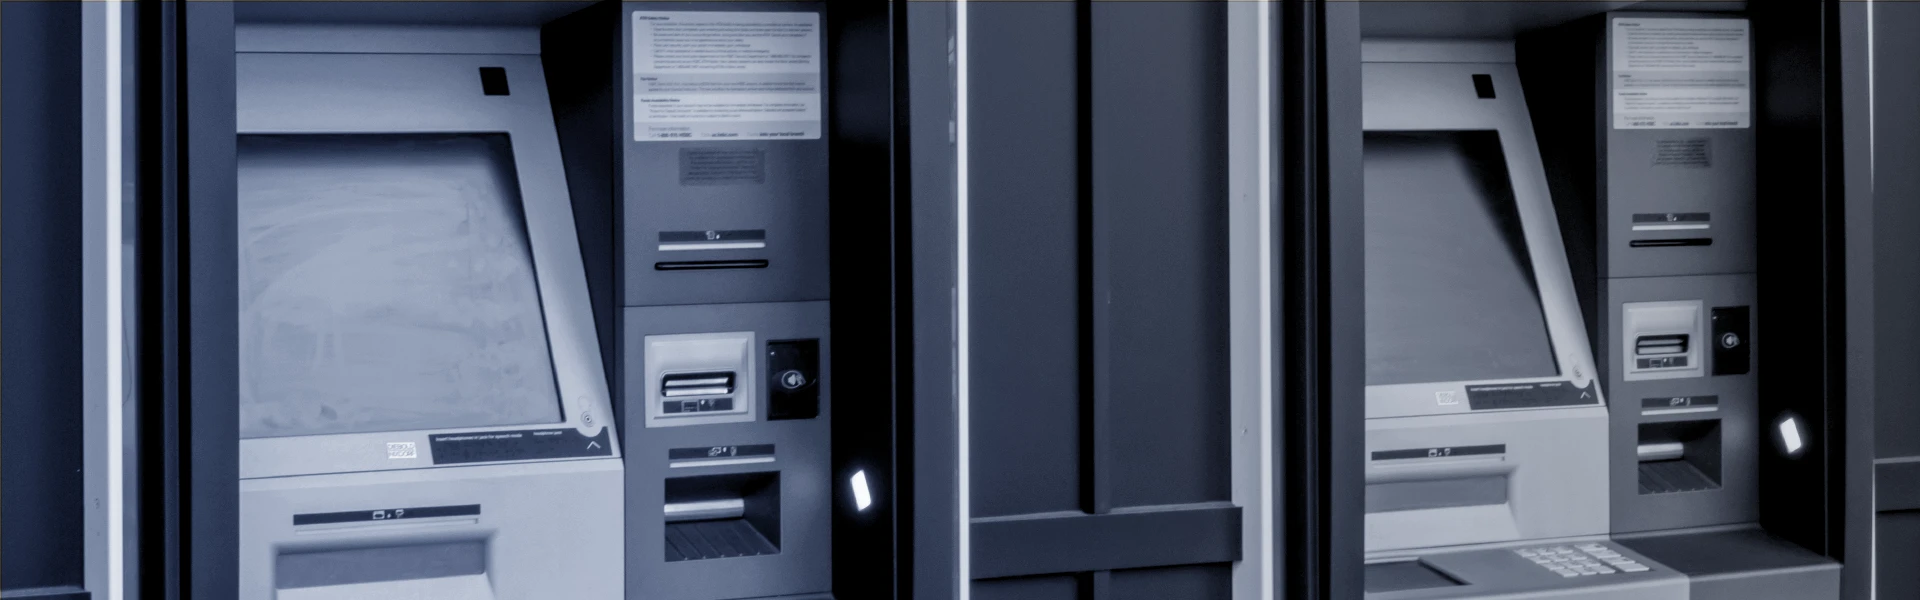 Cleaning Solutions for ATM Technology